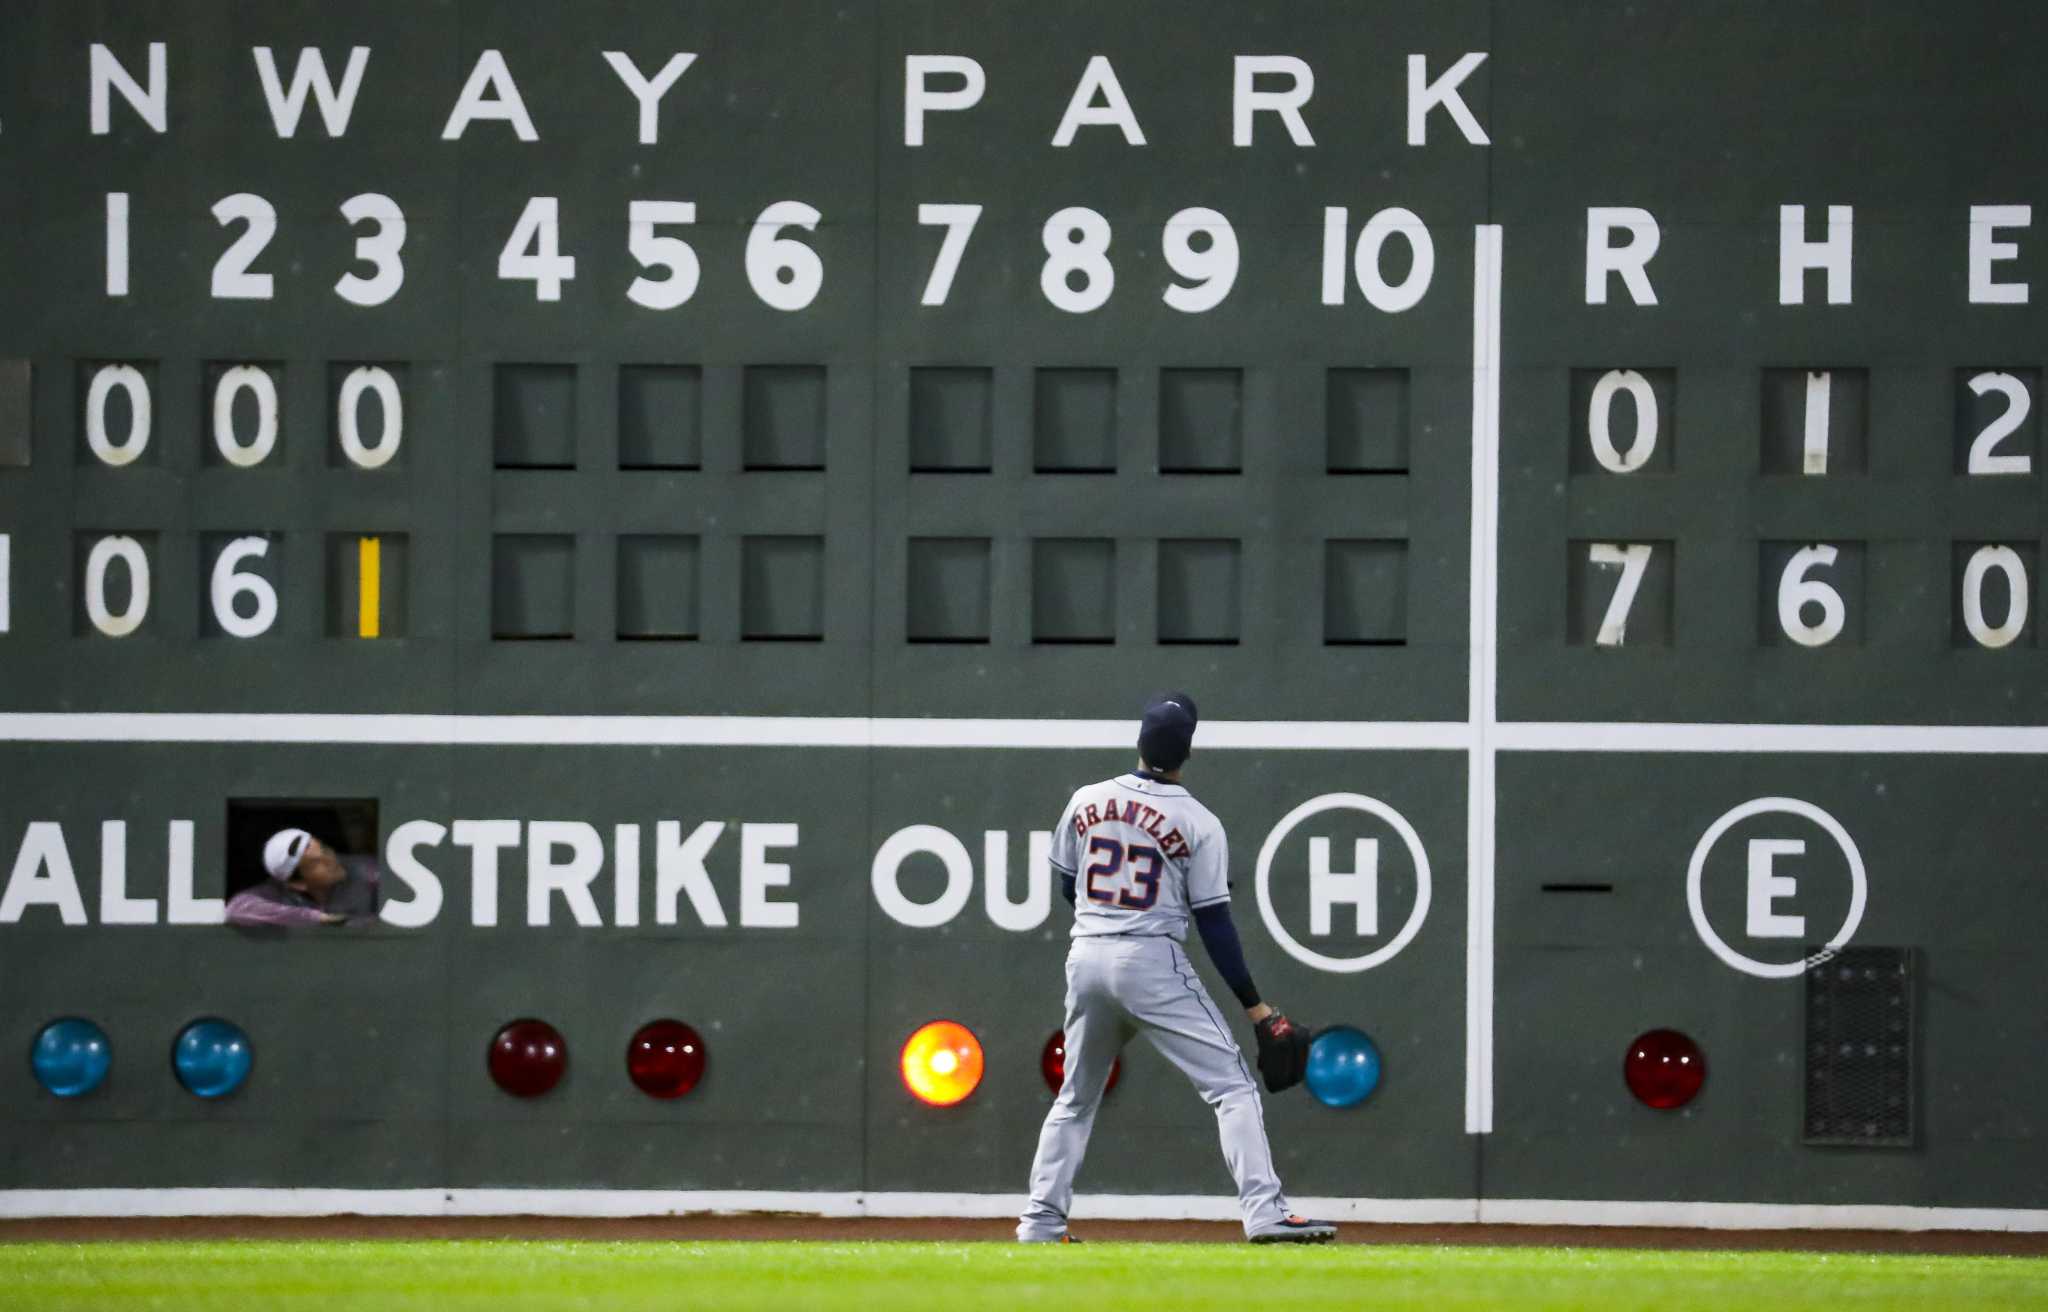 Red Sox 4, Astros 5: Red Sox end their season in heartbreaking